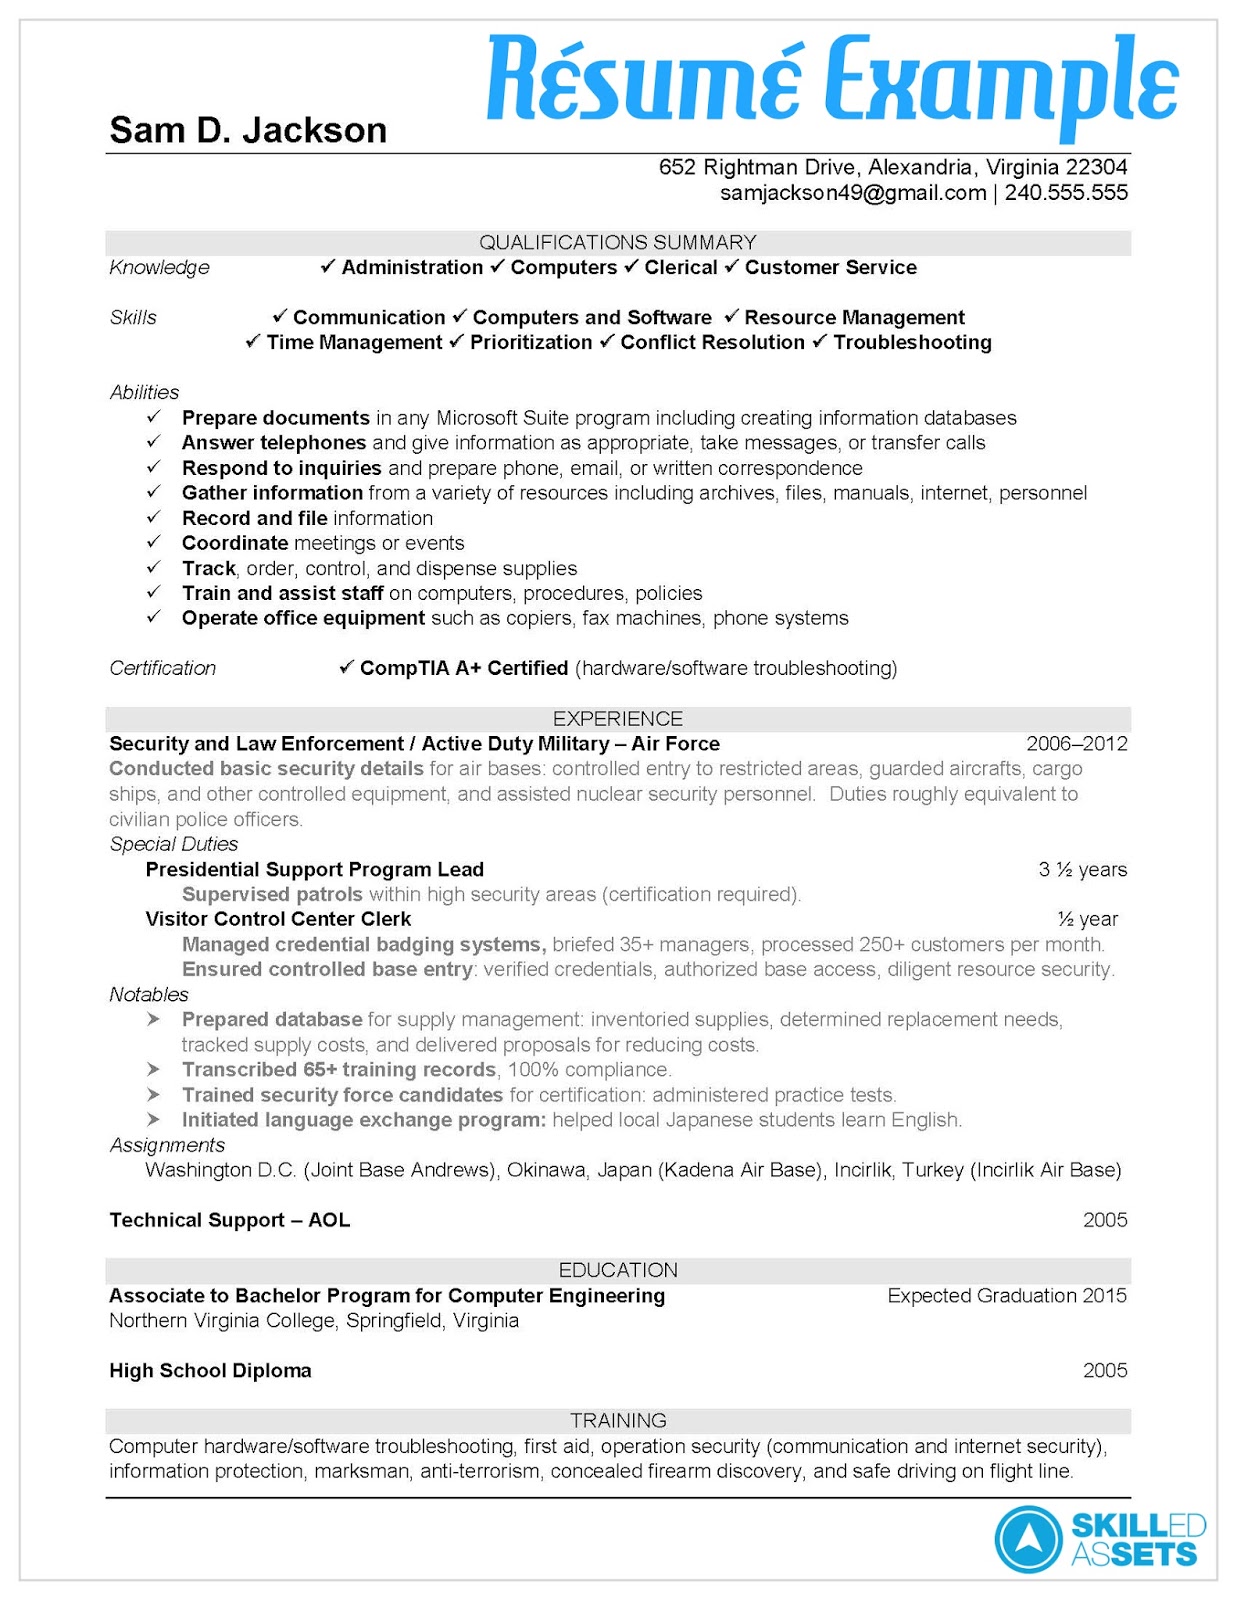 Address email containing resume